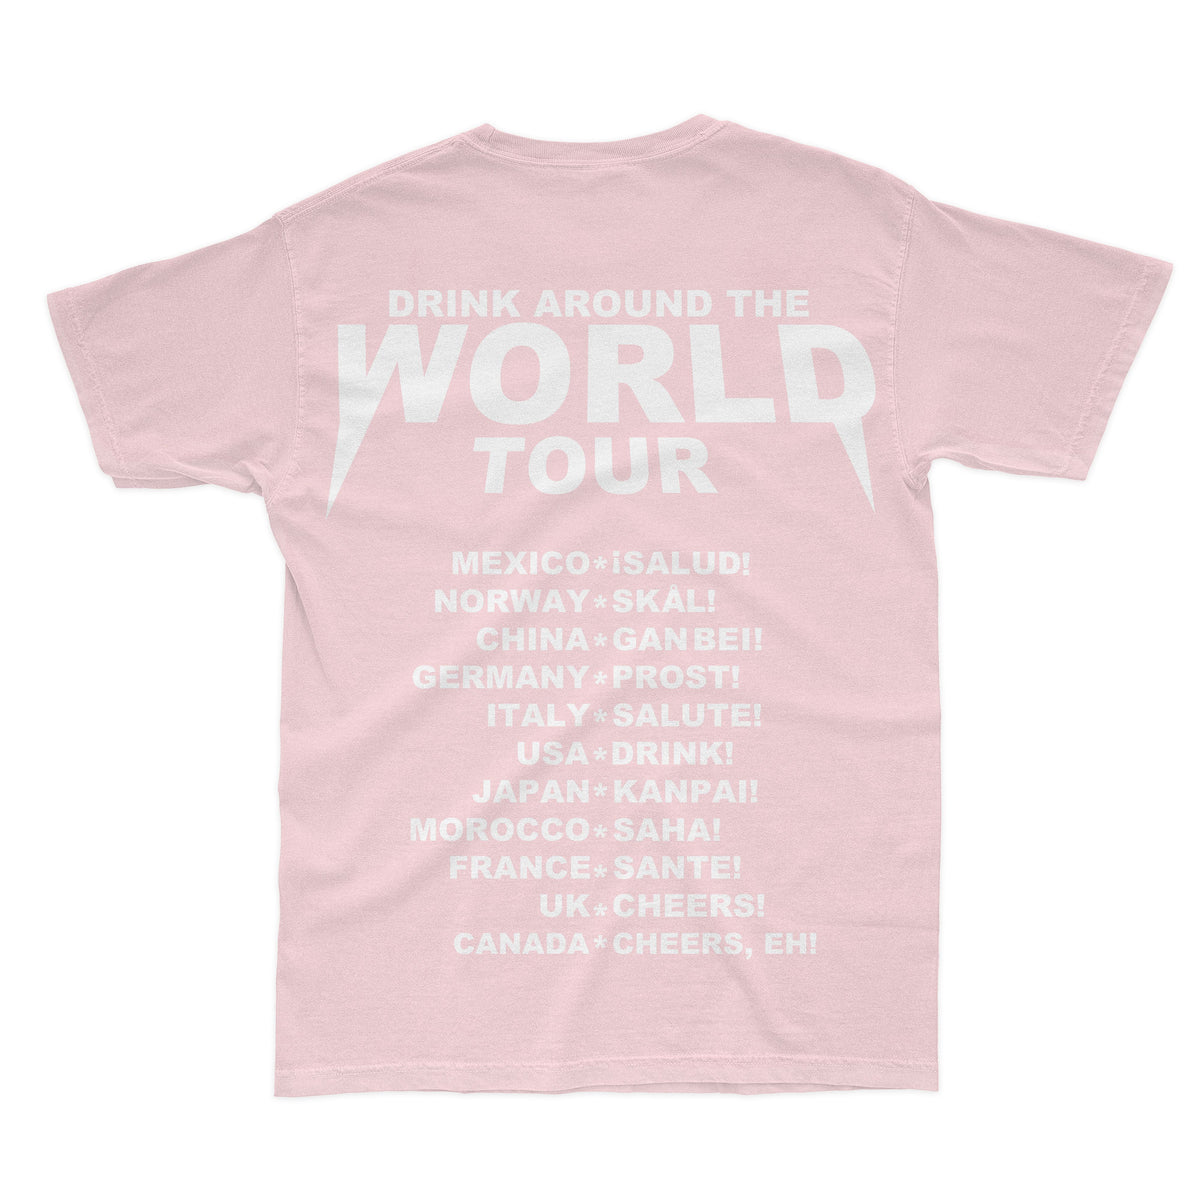 The Lost Bros Drink Around the World Tour Tee - Pink